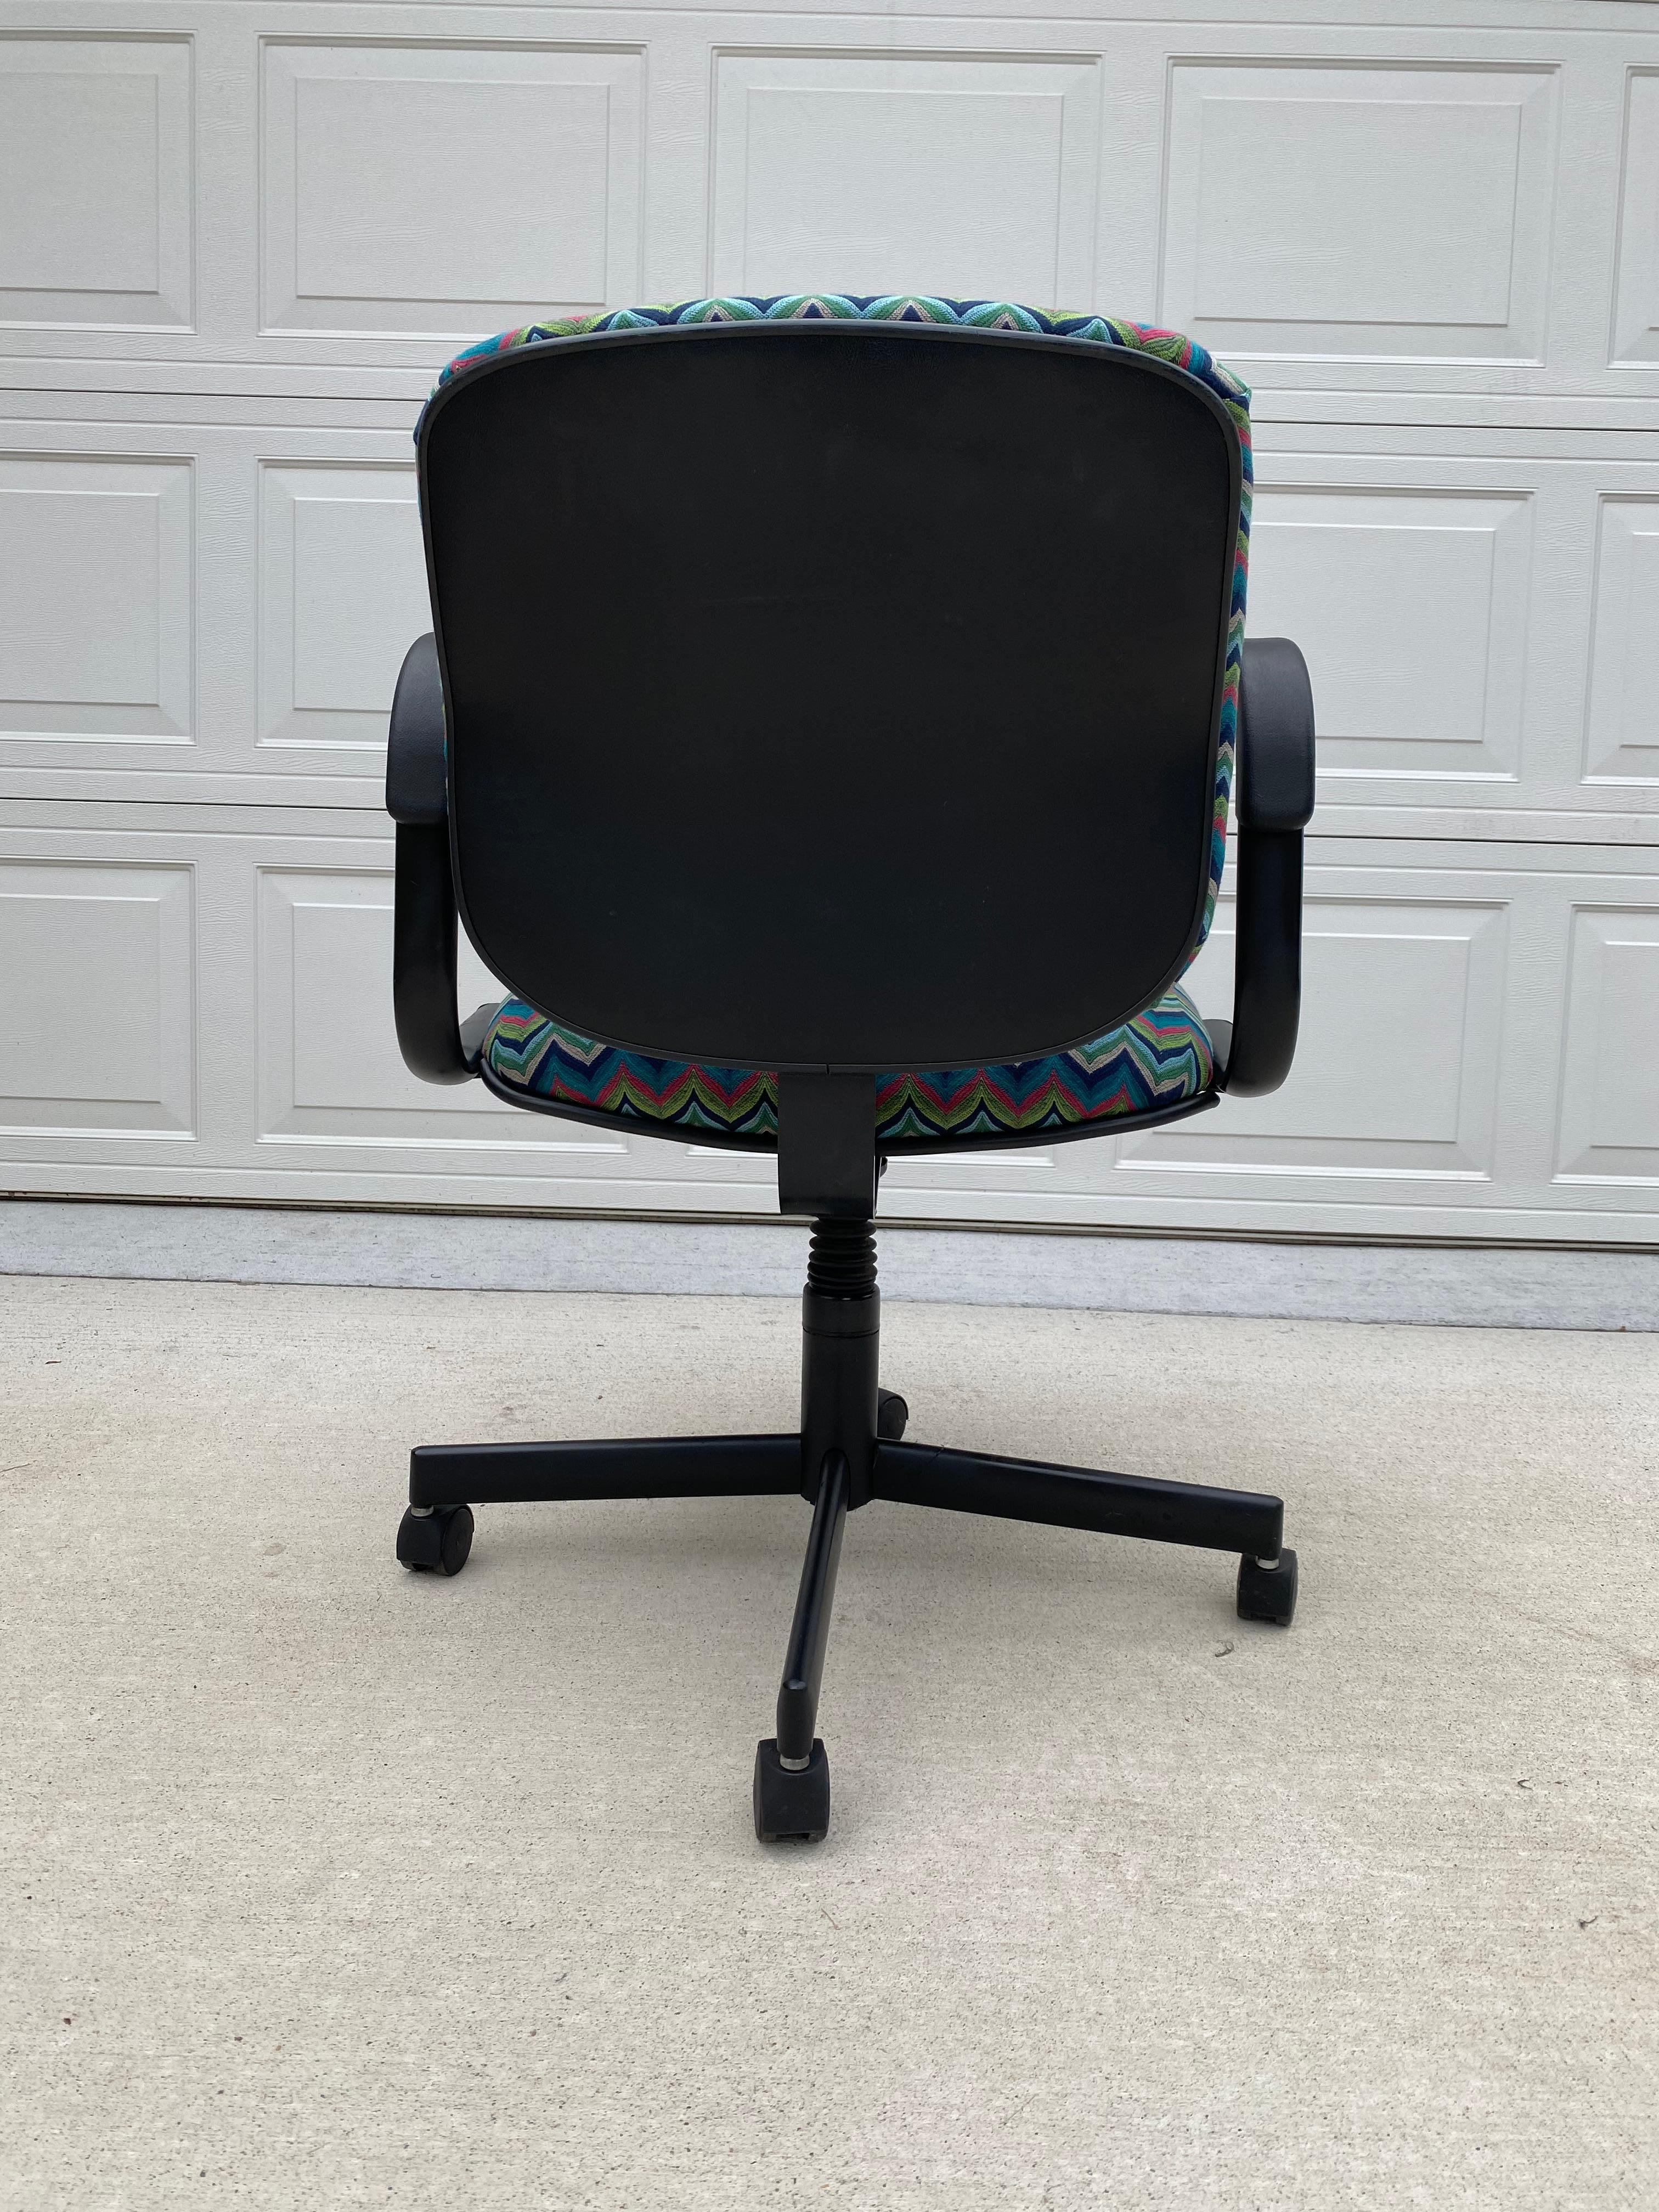 1980s Reupholstered Office Chair by Stylex, Inc. In Mid-Century Modern Fabric For Sale 1